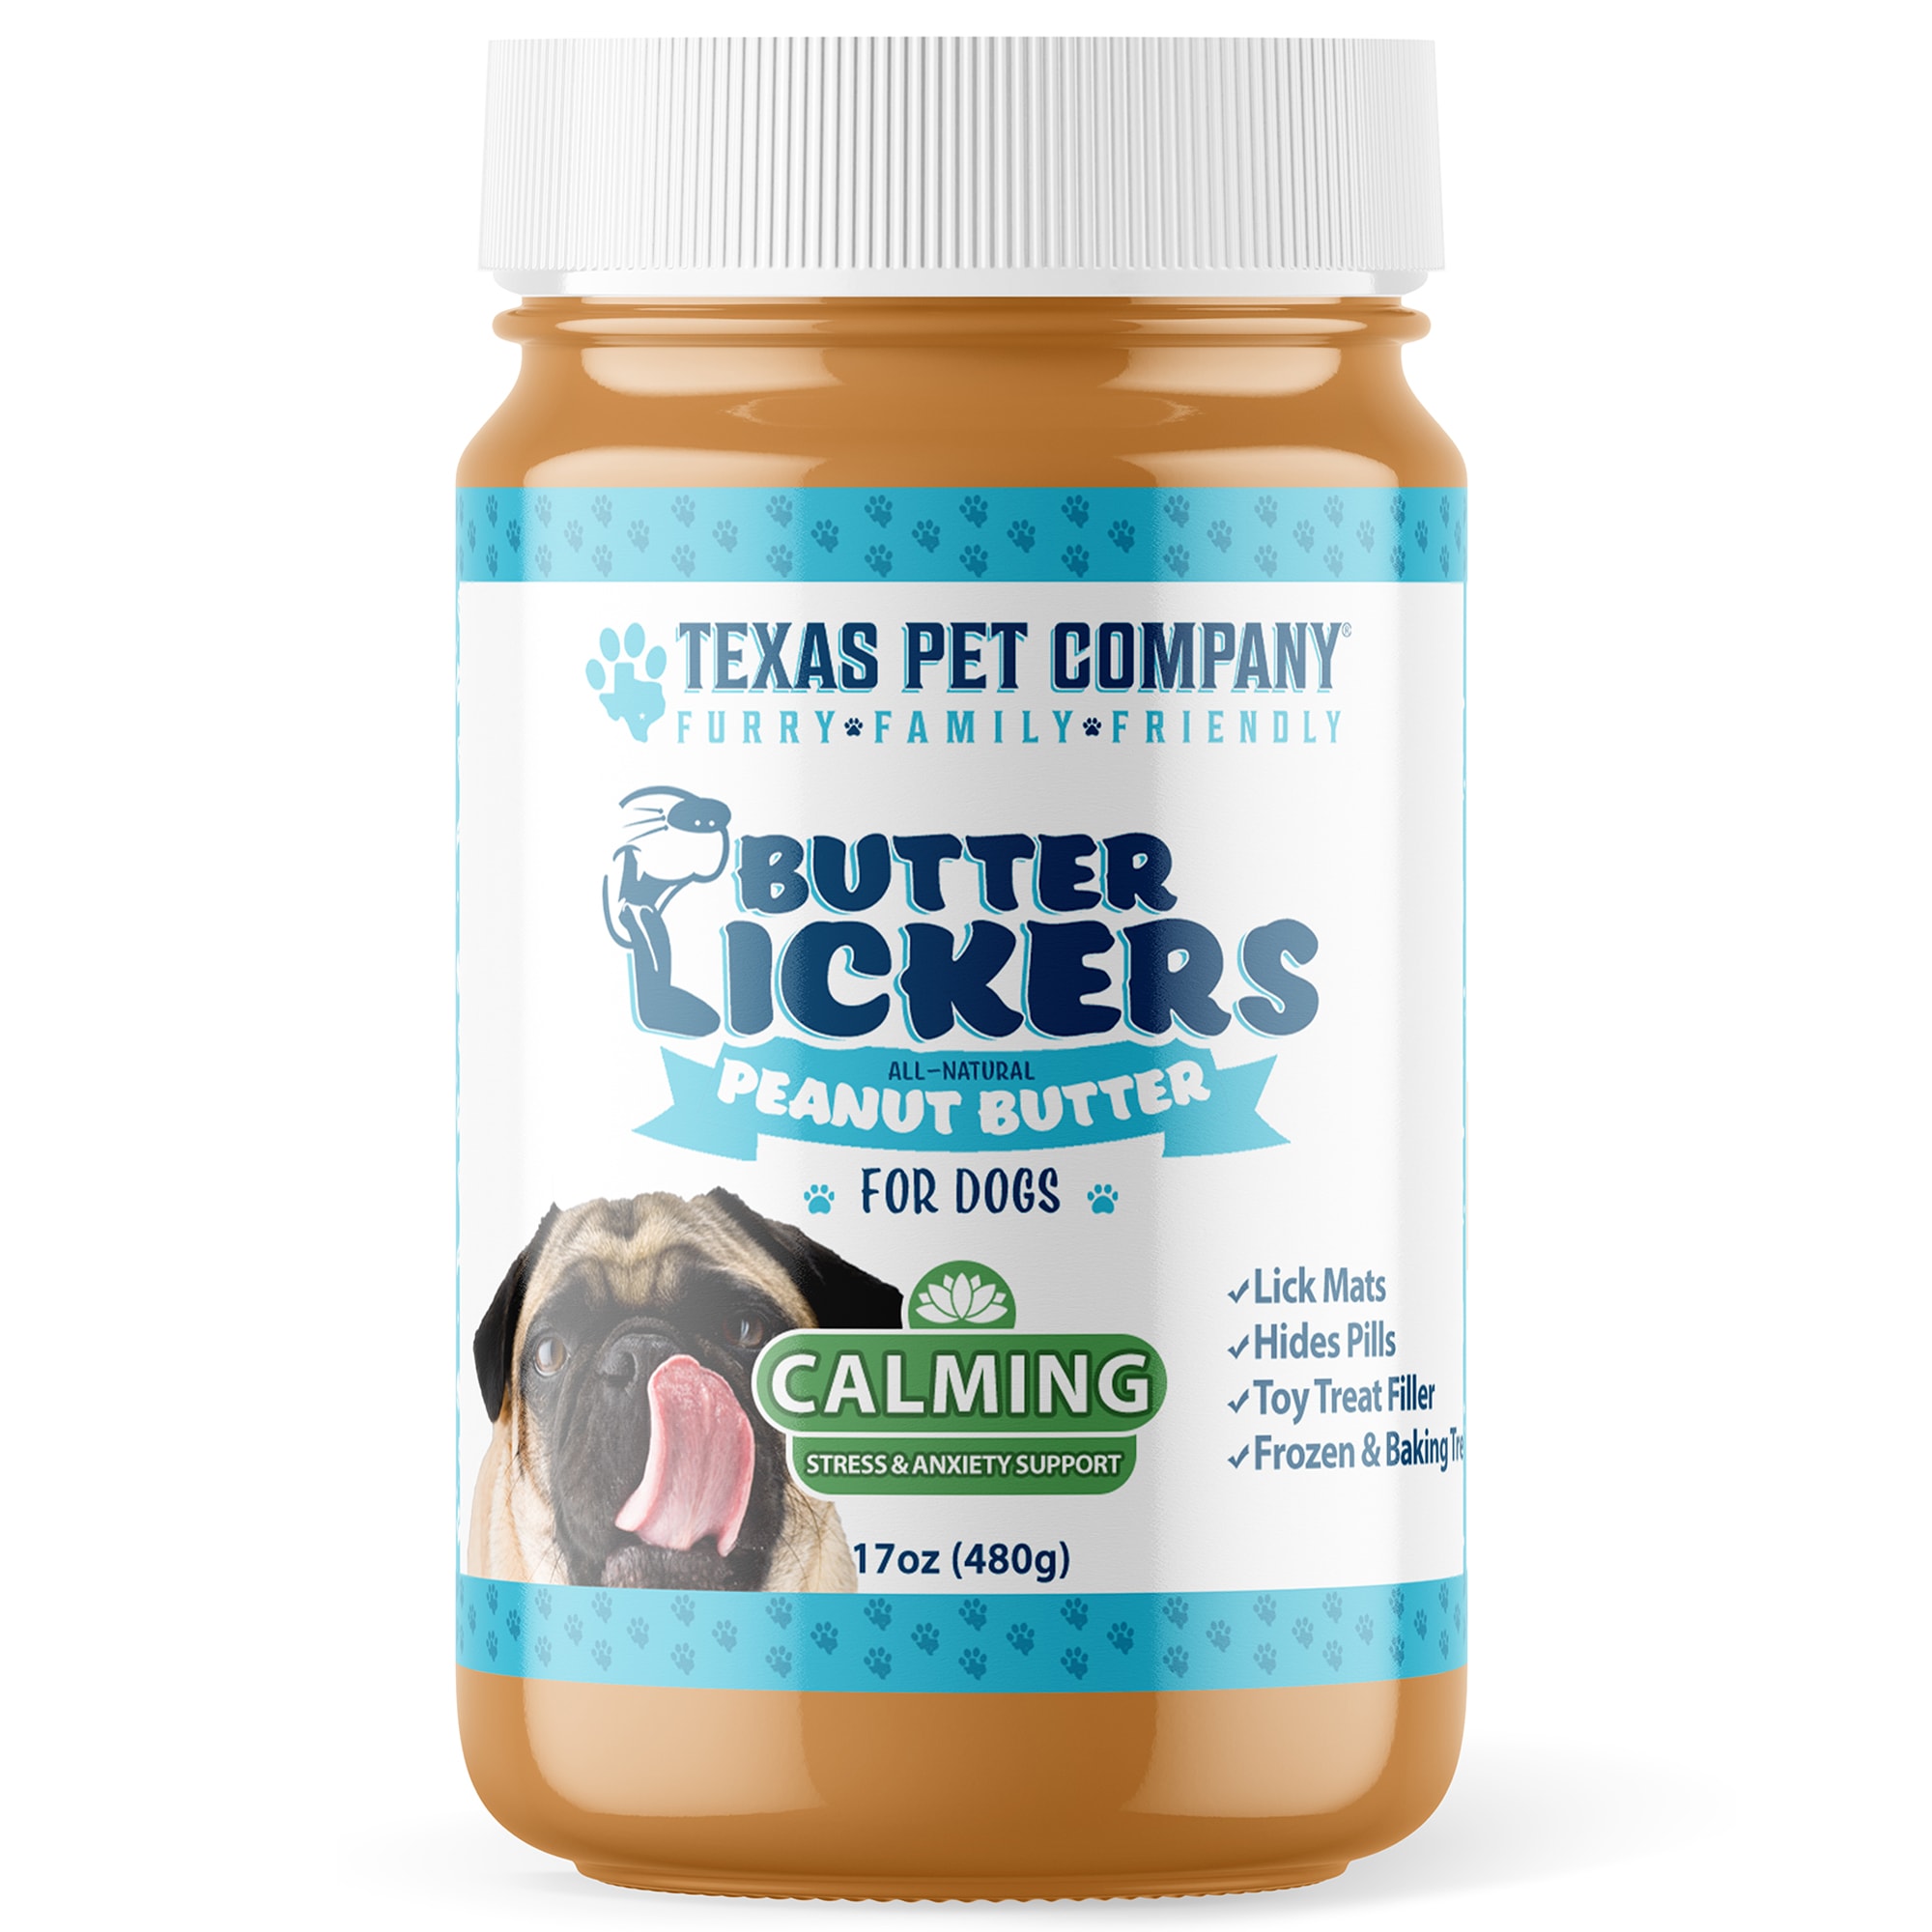 https://texaspetcompany.com/wp-content/uploads/2022/01/Butter-Lickers-Calming-Peanut-Butter-For-Dogs-Front.jpg